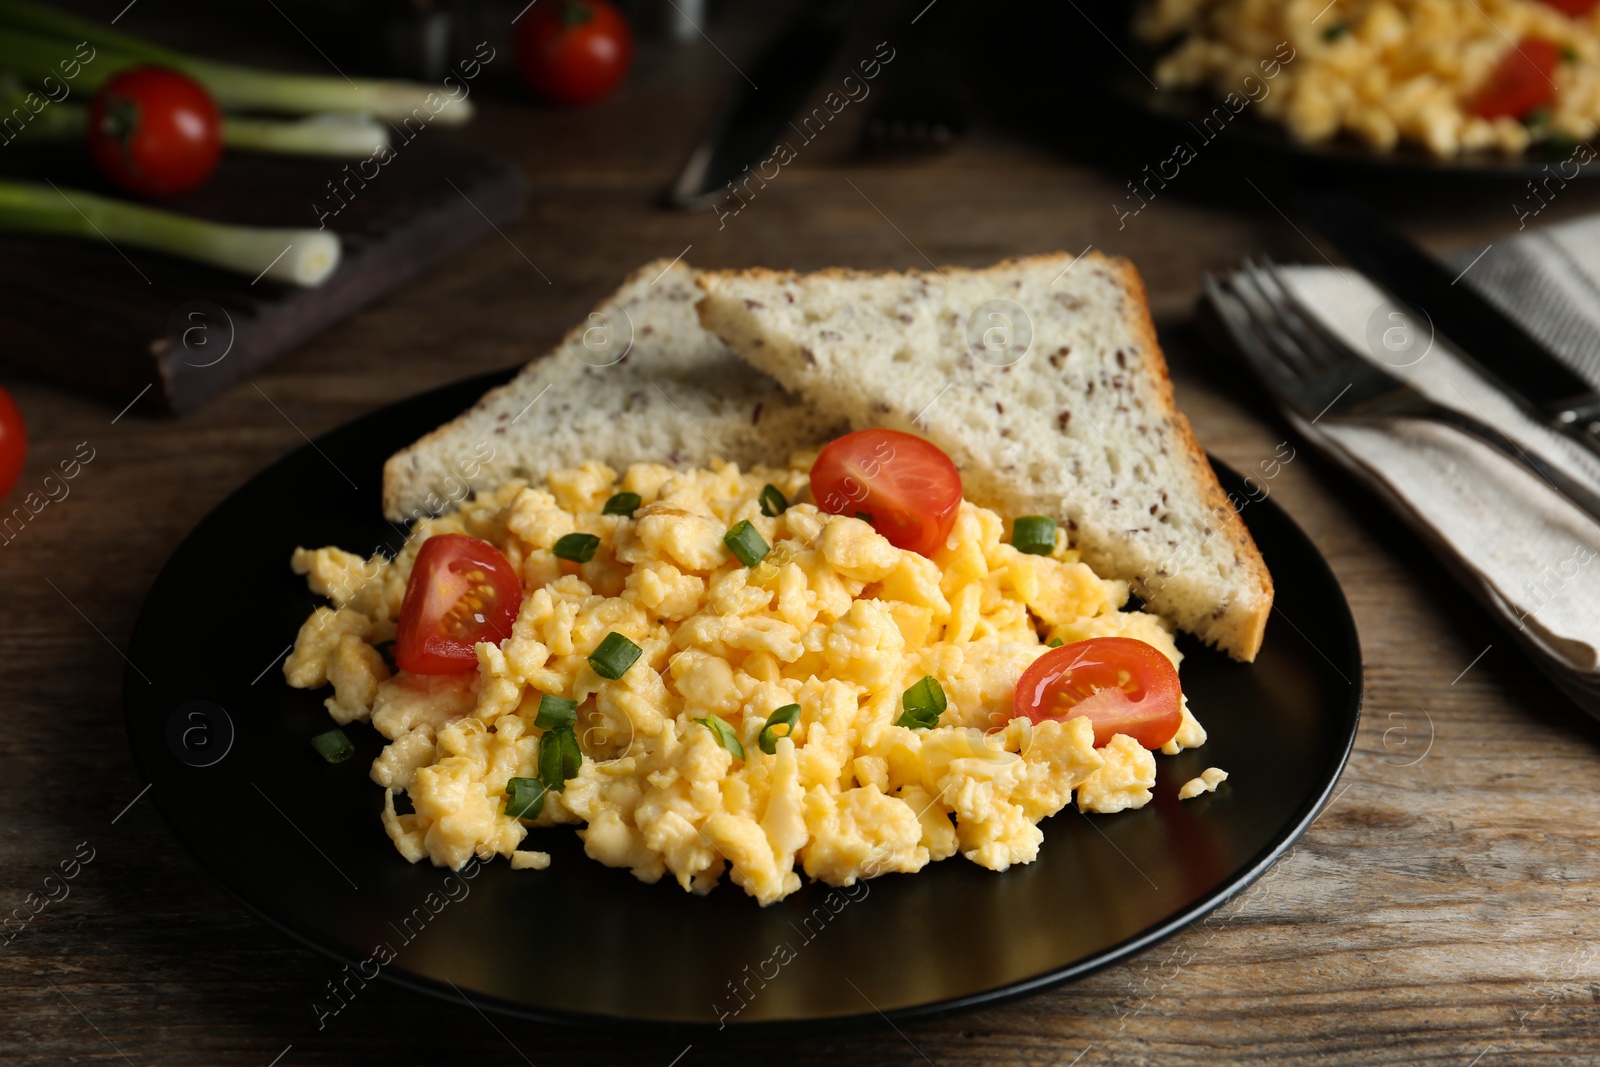 Photo of Tasty scrambled eggs with cherry tomato and bread on wooden table